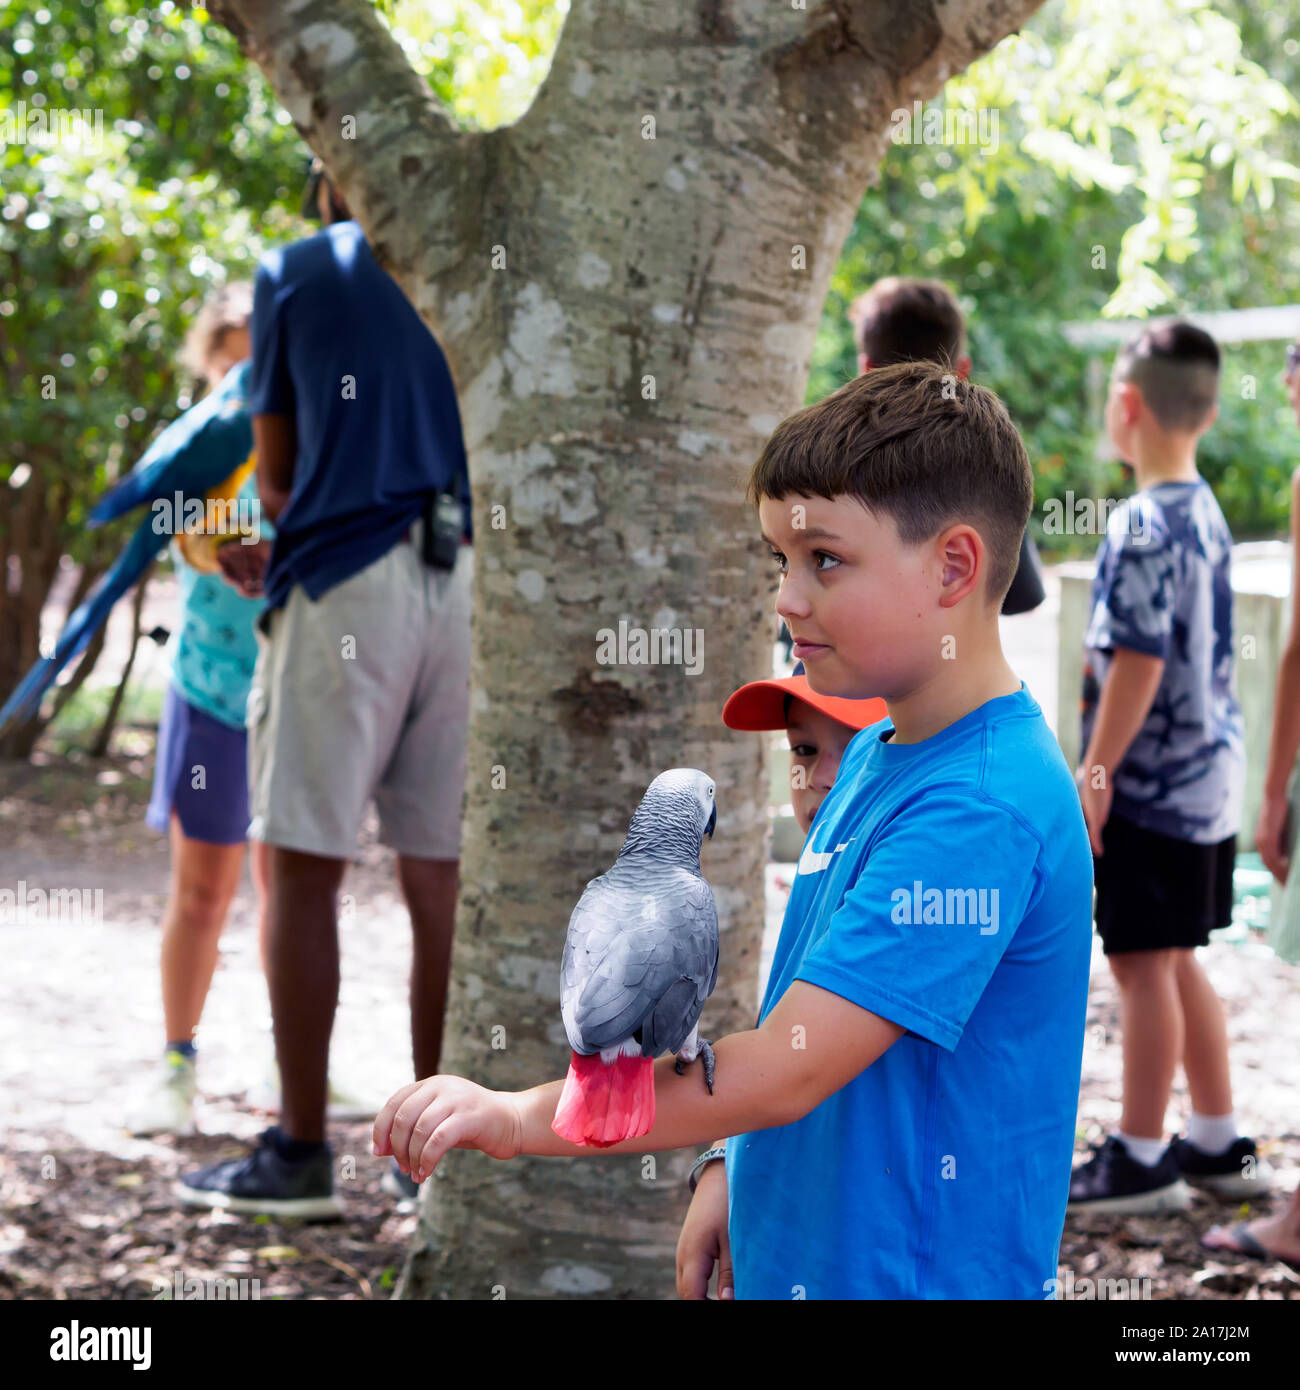 African grey parrot on boy's arm at the weekly 'Parrot Talk' presentation.  South Texas Botanical Gardens & Nature Center in Corpus Christi, Texas USA. Stock Photo